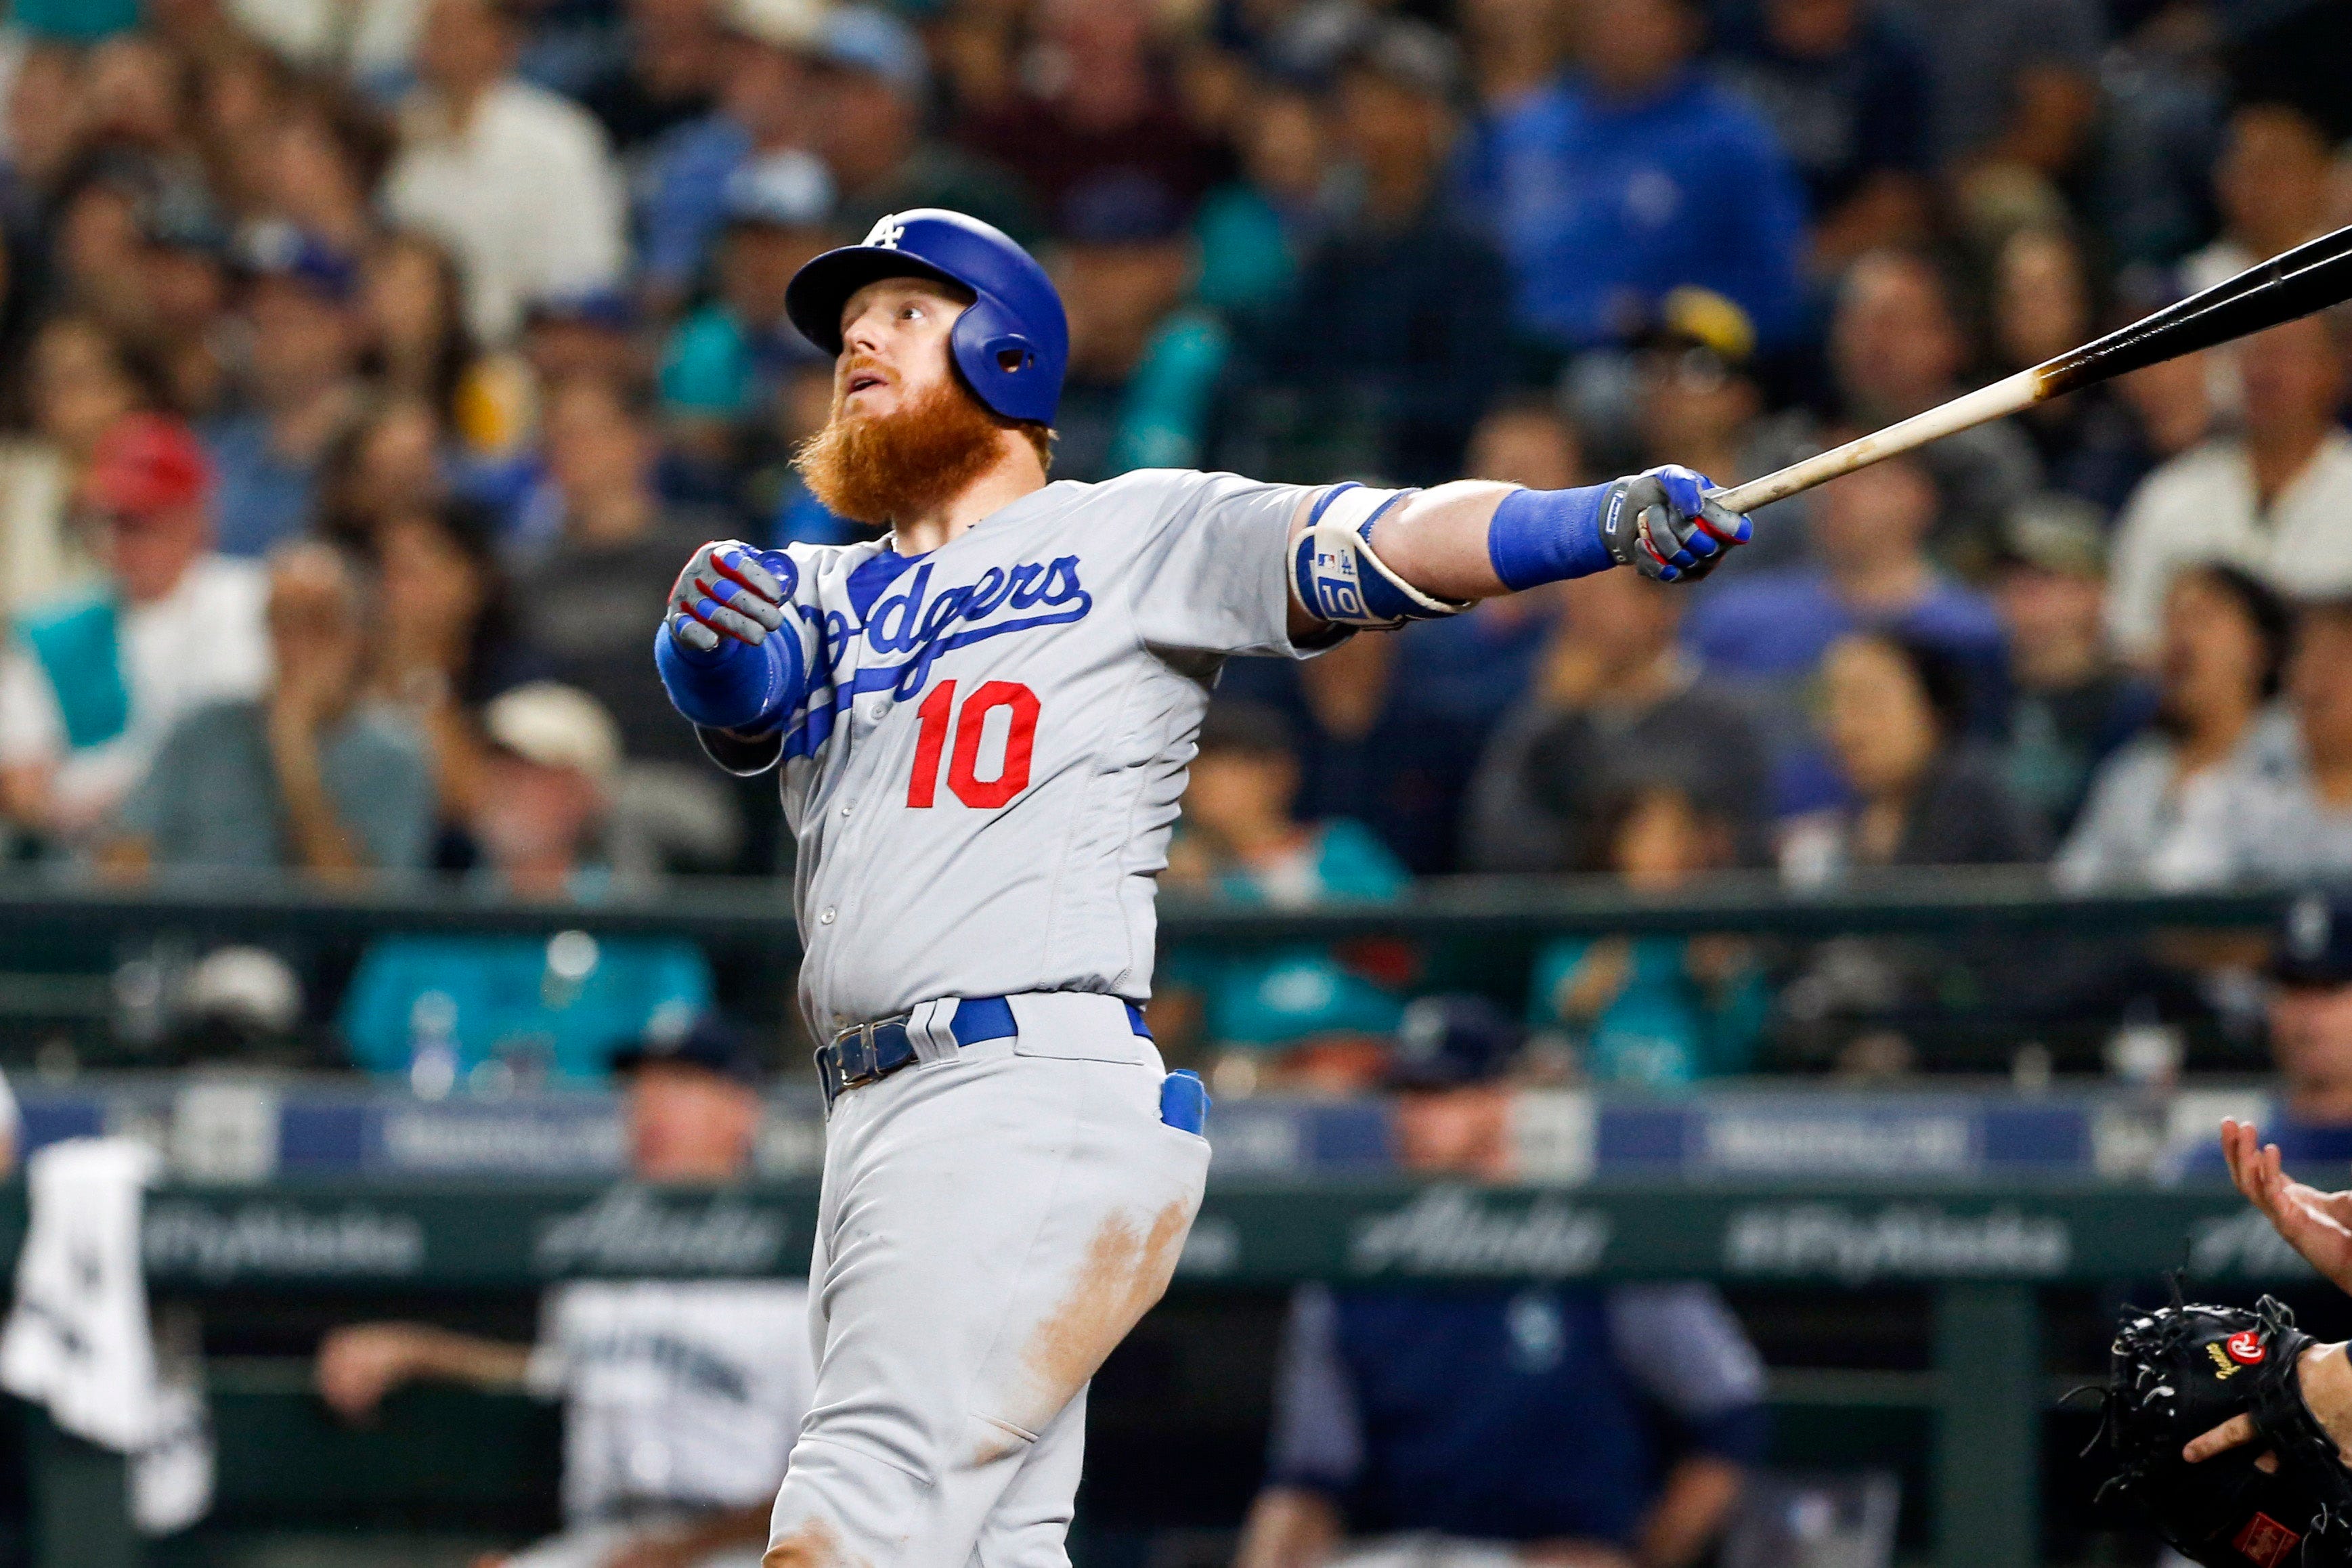 Dodgers slugger Justin Turner (10) watches his solo home run leave the yard during the eighth inning against the Mariners in Seattle.